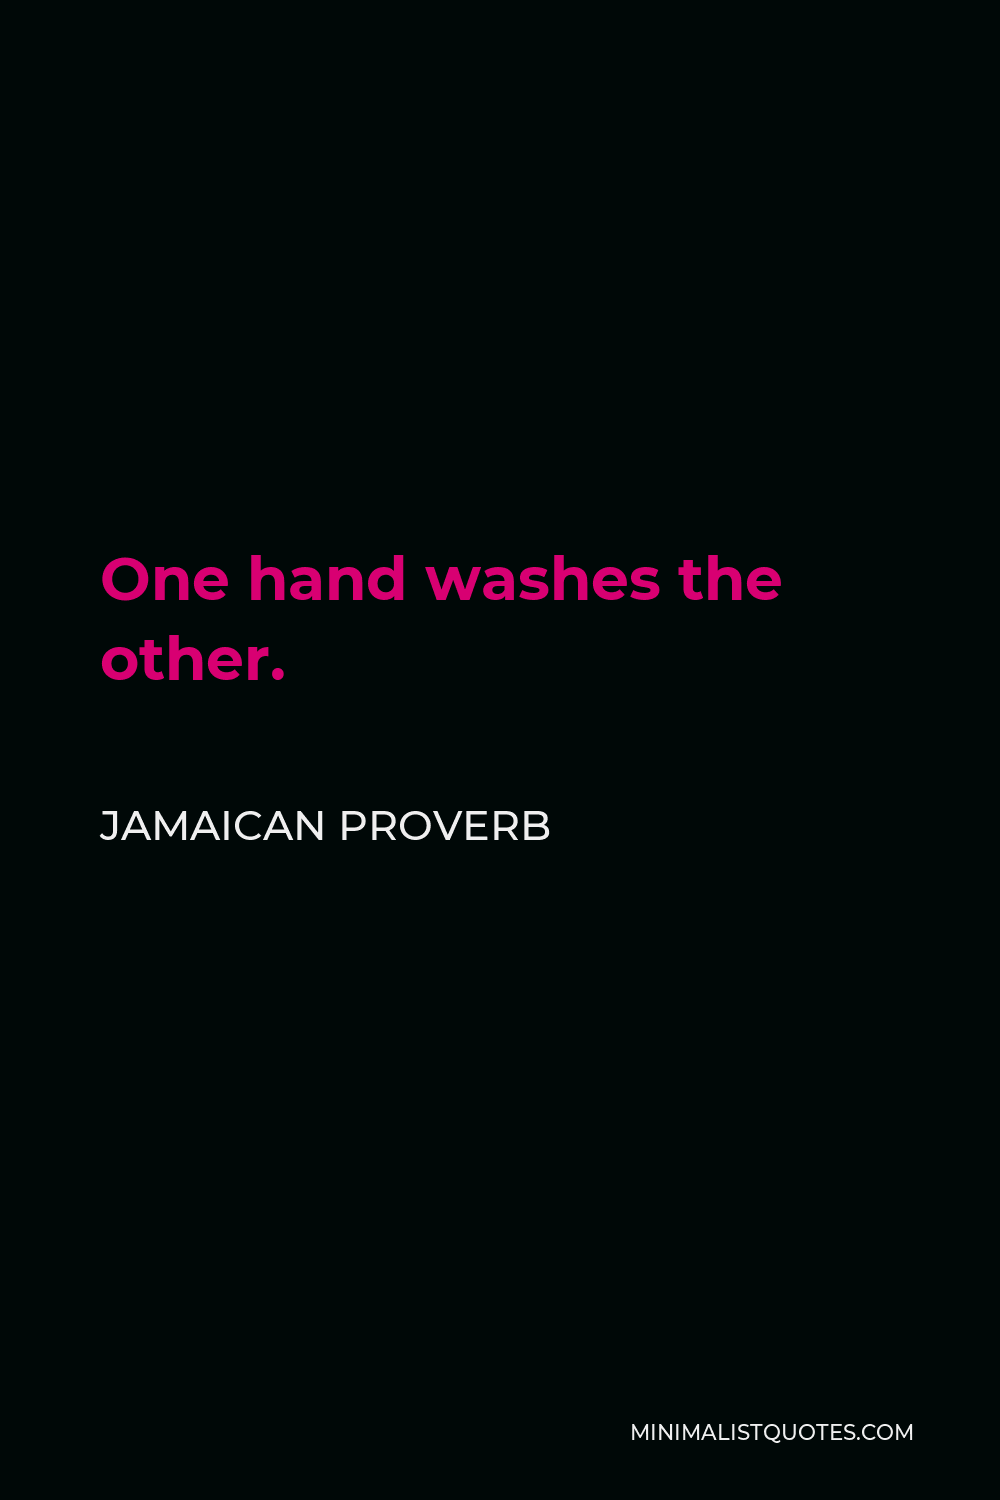 Jamaican Proverb Quote - One hand washes the other.